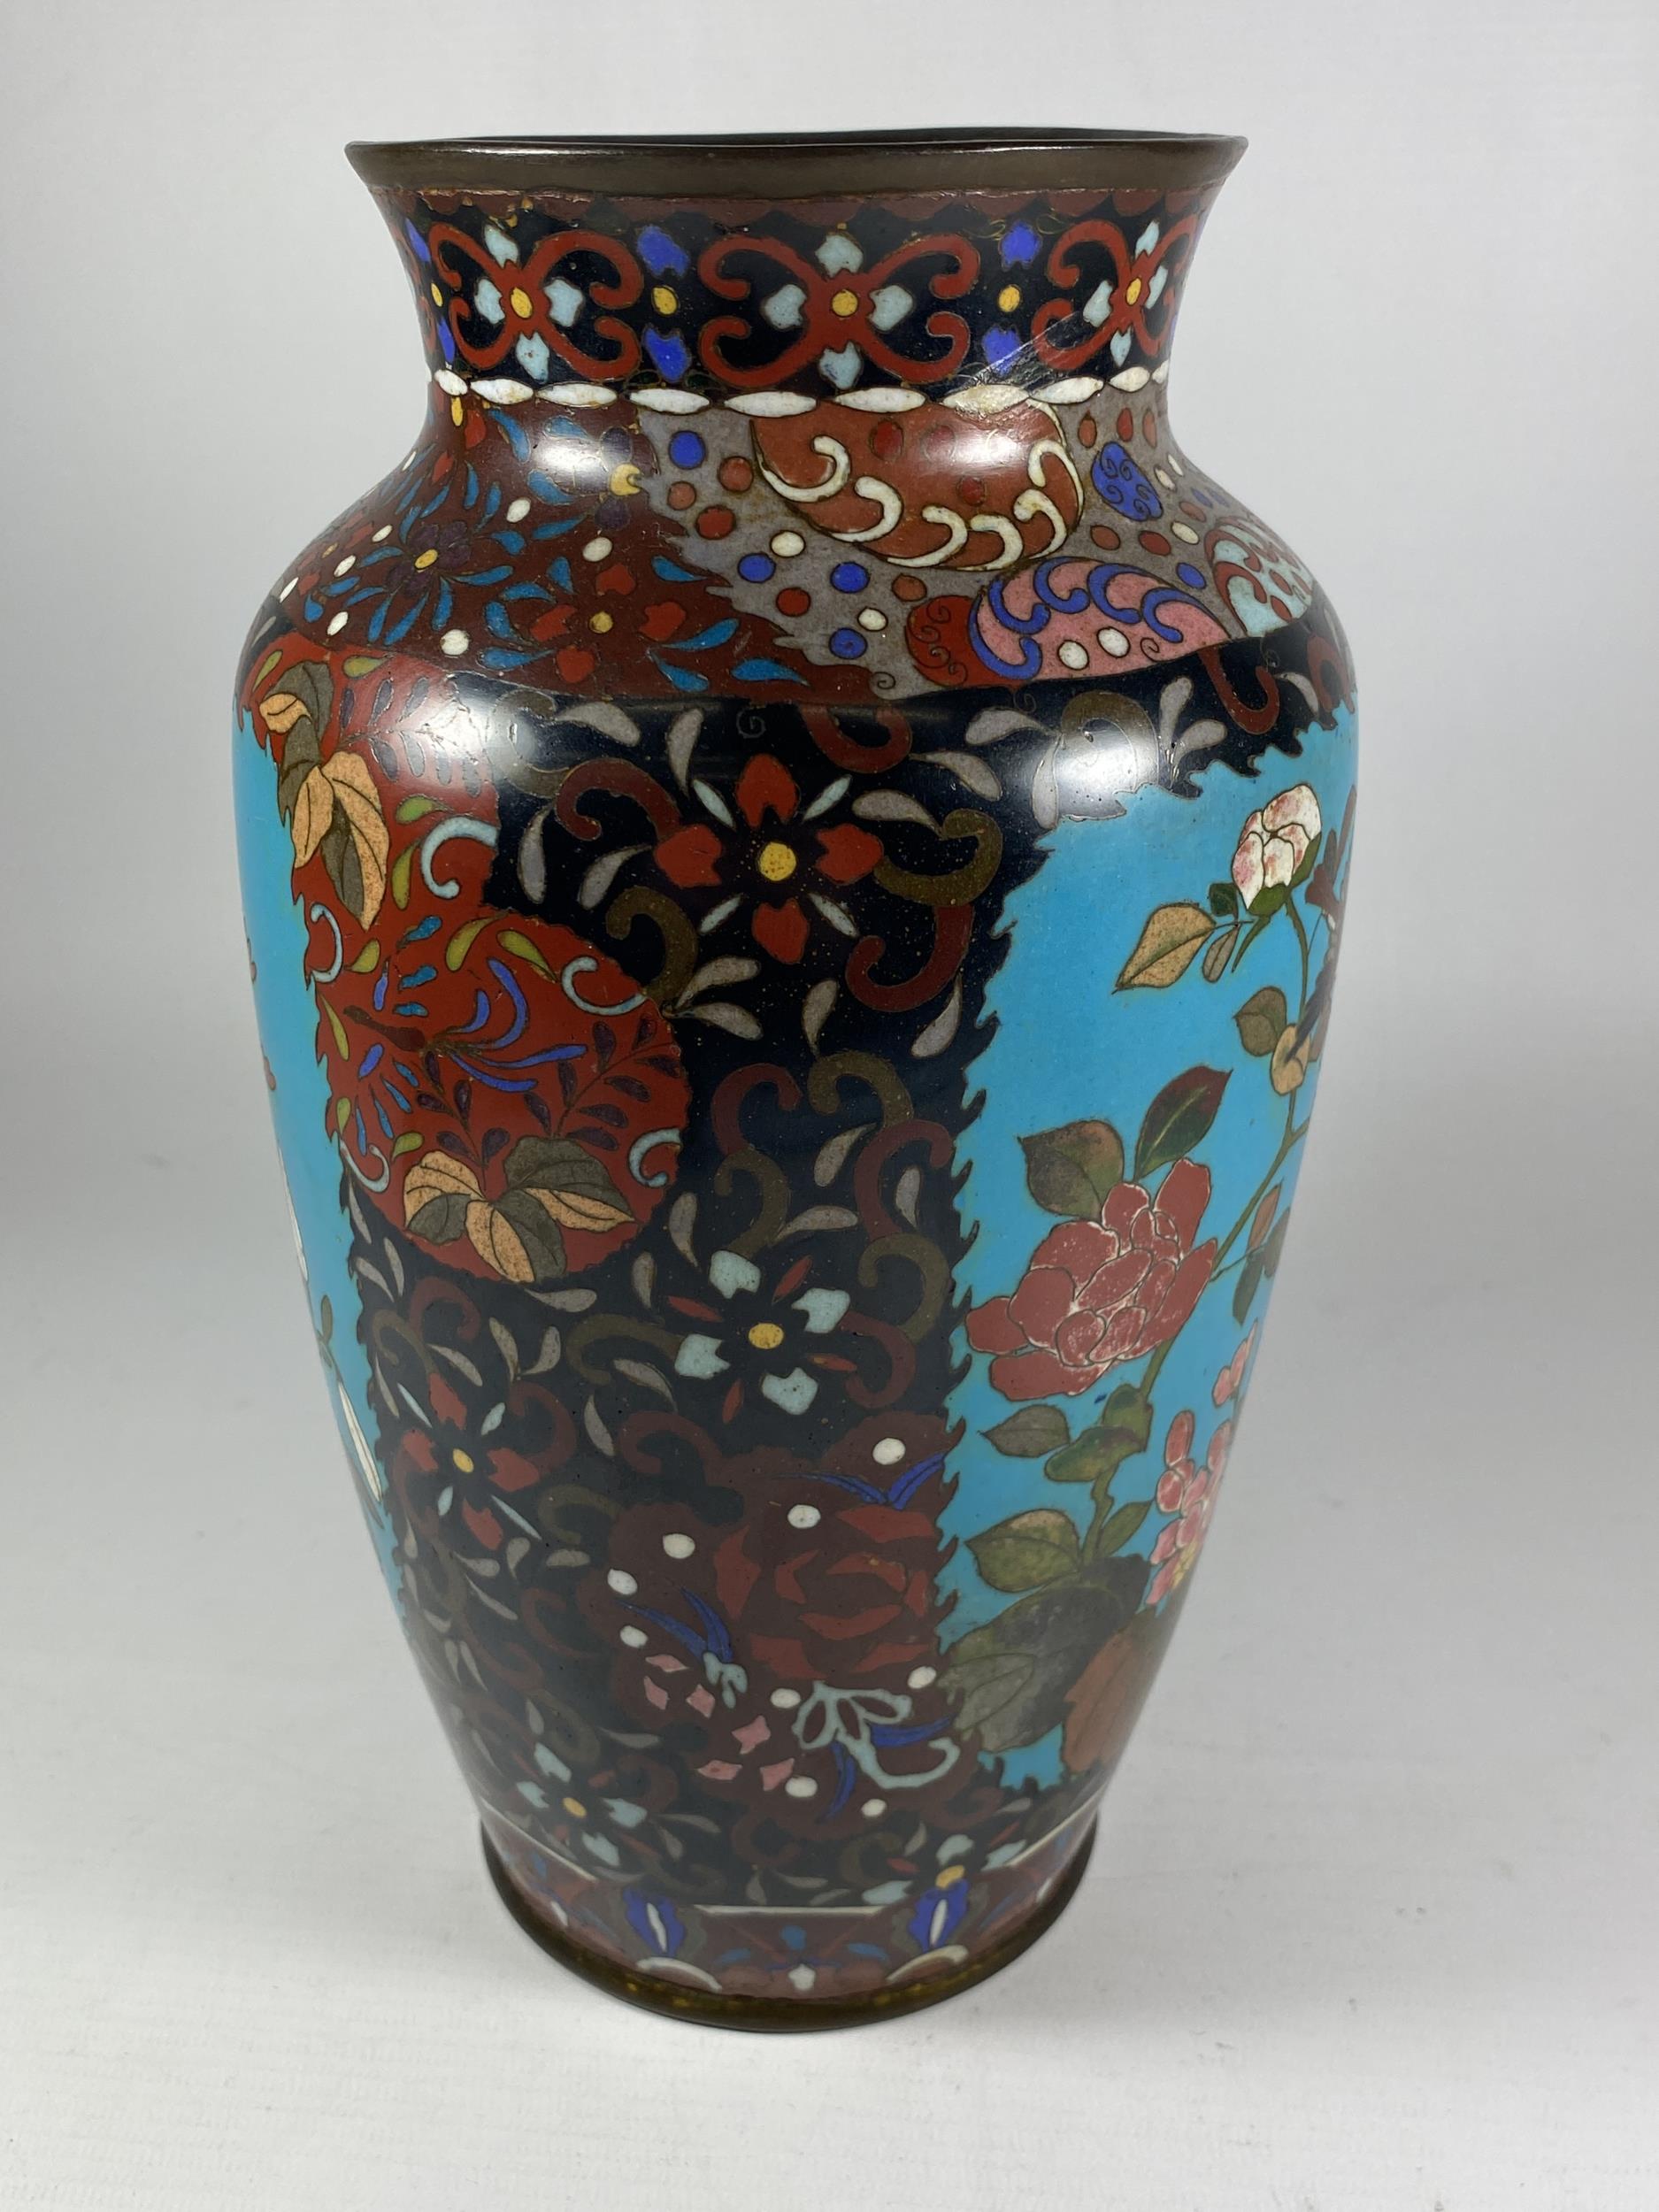 A 19TH CENTURY CHINESE CLOISONNE VASE WITH BIRD & FLORAL DESIGN, HEIGHT 26.5CM - Image 2 of 6